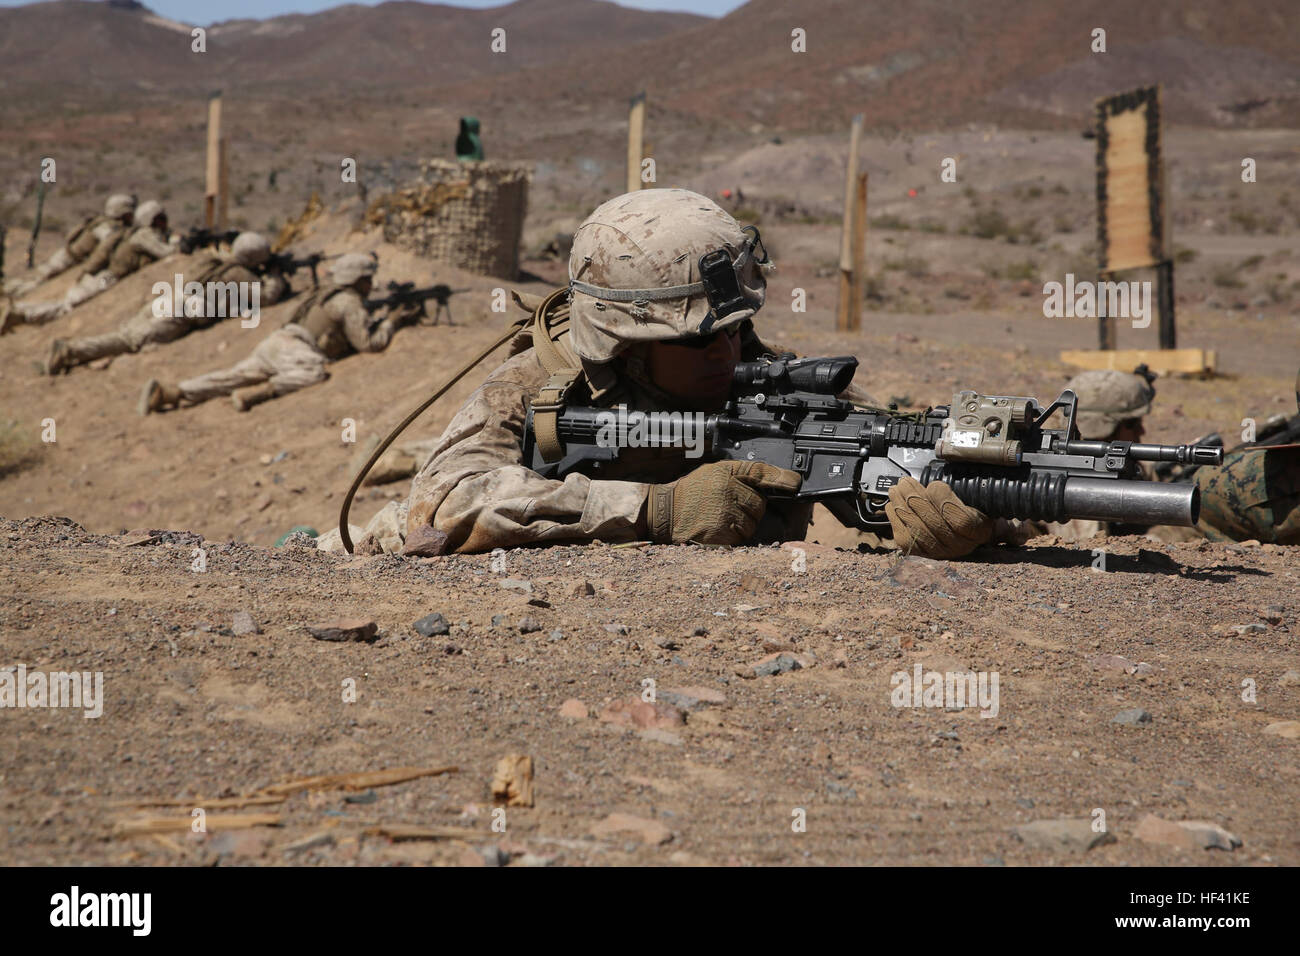 Lance Corporal Oscar Jimenez, a rifleman with Company L, 3rd Battalion, 7th Marine Regiment, 1st Marine Division provides security after his squad clears a trench during an assault aboard Marine Corps Air Ground Combat Center Twentynine Palms, Calif., June 8, 2016.  The Marines were being tested in a Marine Corps Combat Readiness Evaluation, which prepares them for their upcoming deployment with the Special Purpose Marine Air-Ground Task Force – Crisis Response – Central Command. (U.S. Marine Corps photo by Lance Cpl. Timothy Valero/ Released) 3rd Battalion 7th Marines prepare for deployment 1 Stock Photo